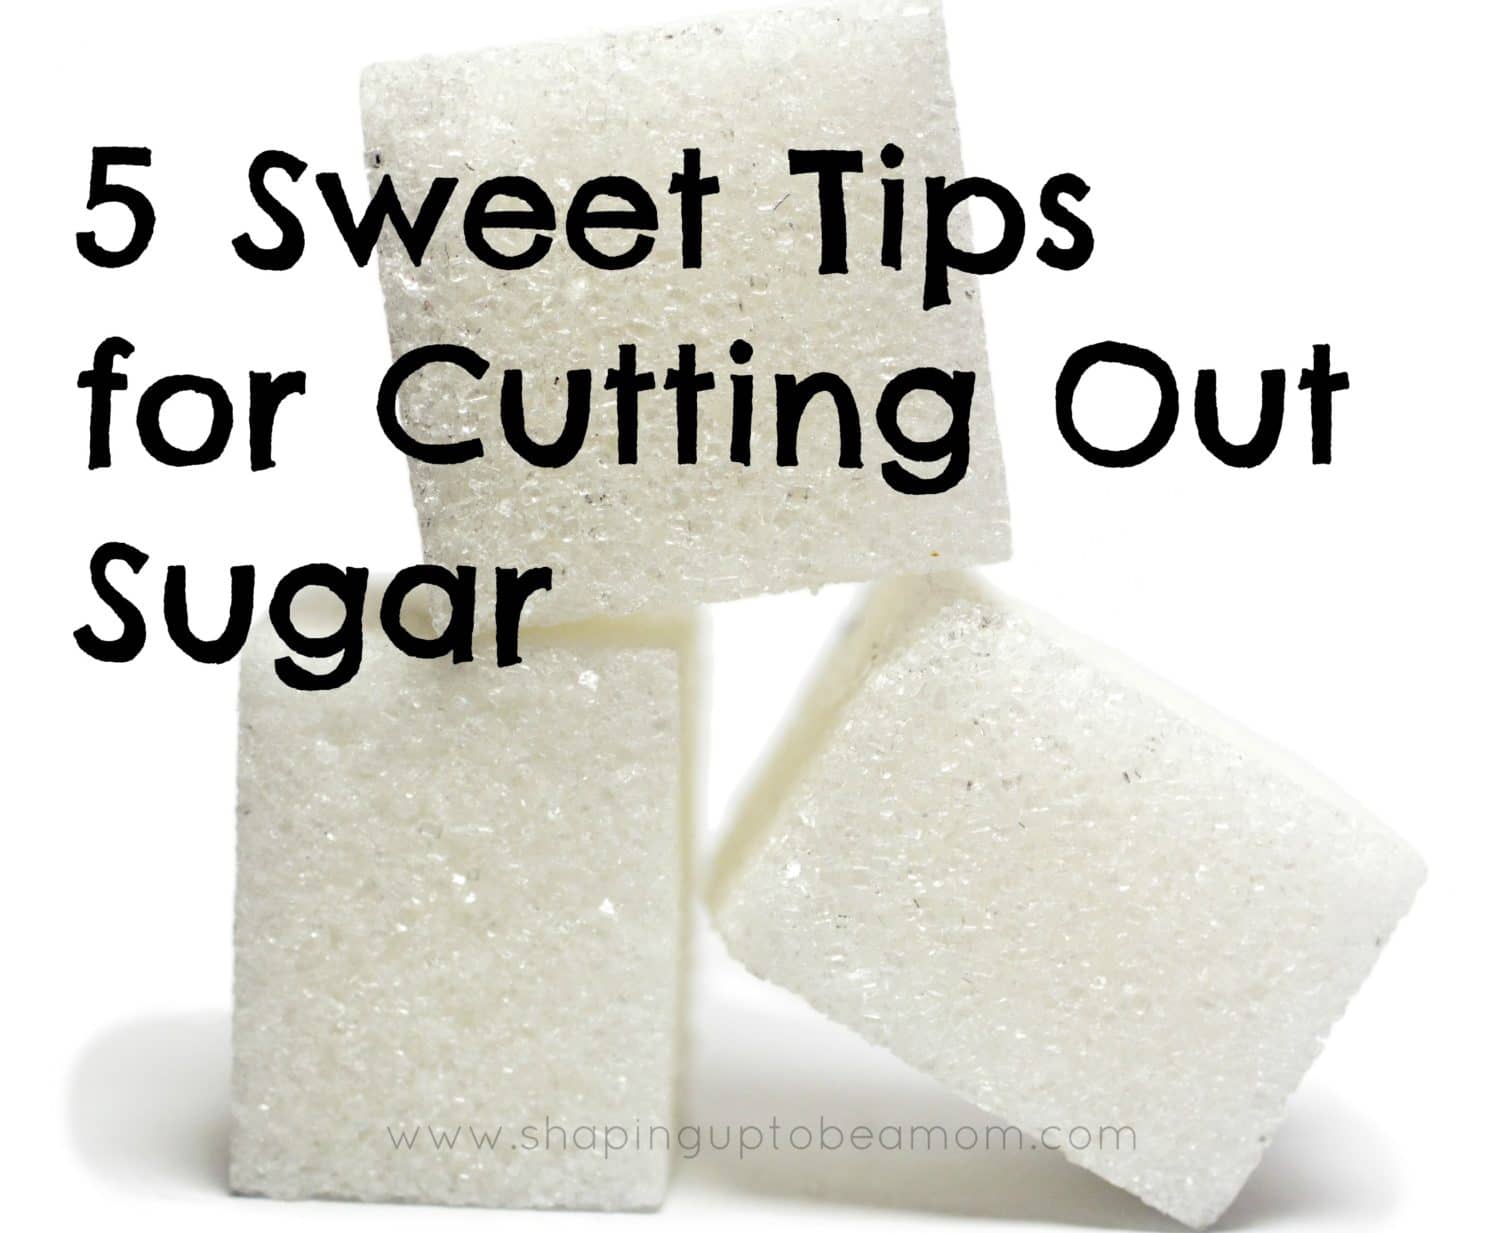 5 Sweet Tips for Cutting Out Sugar